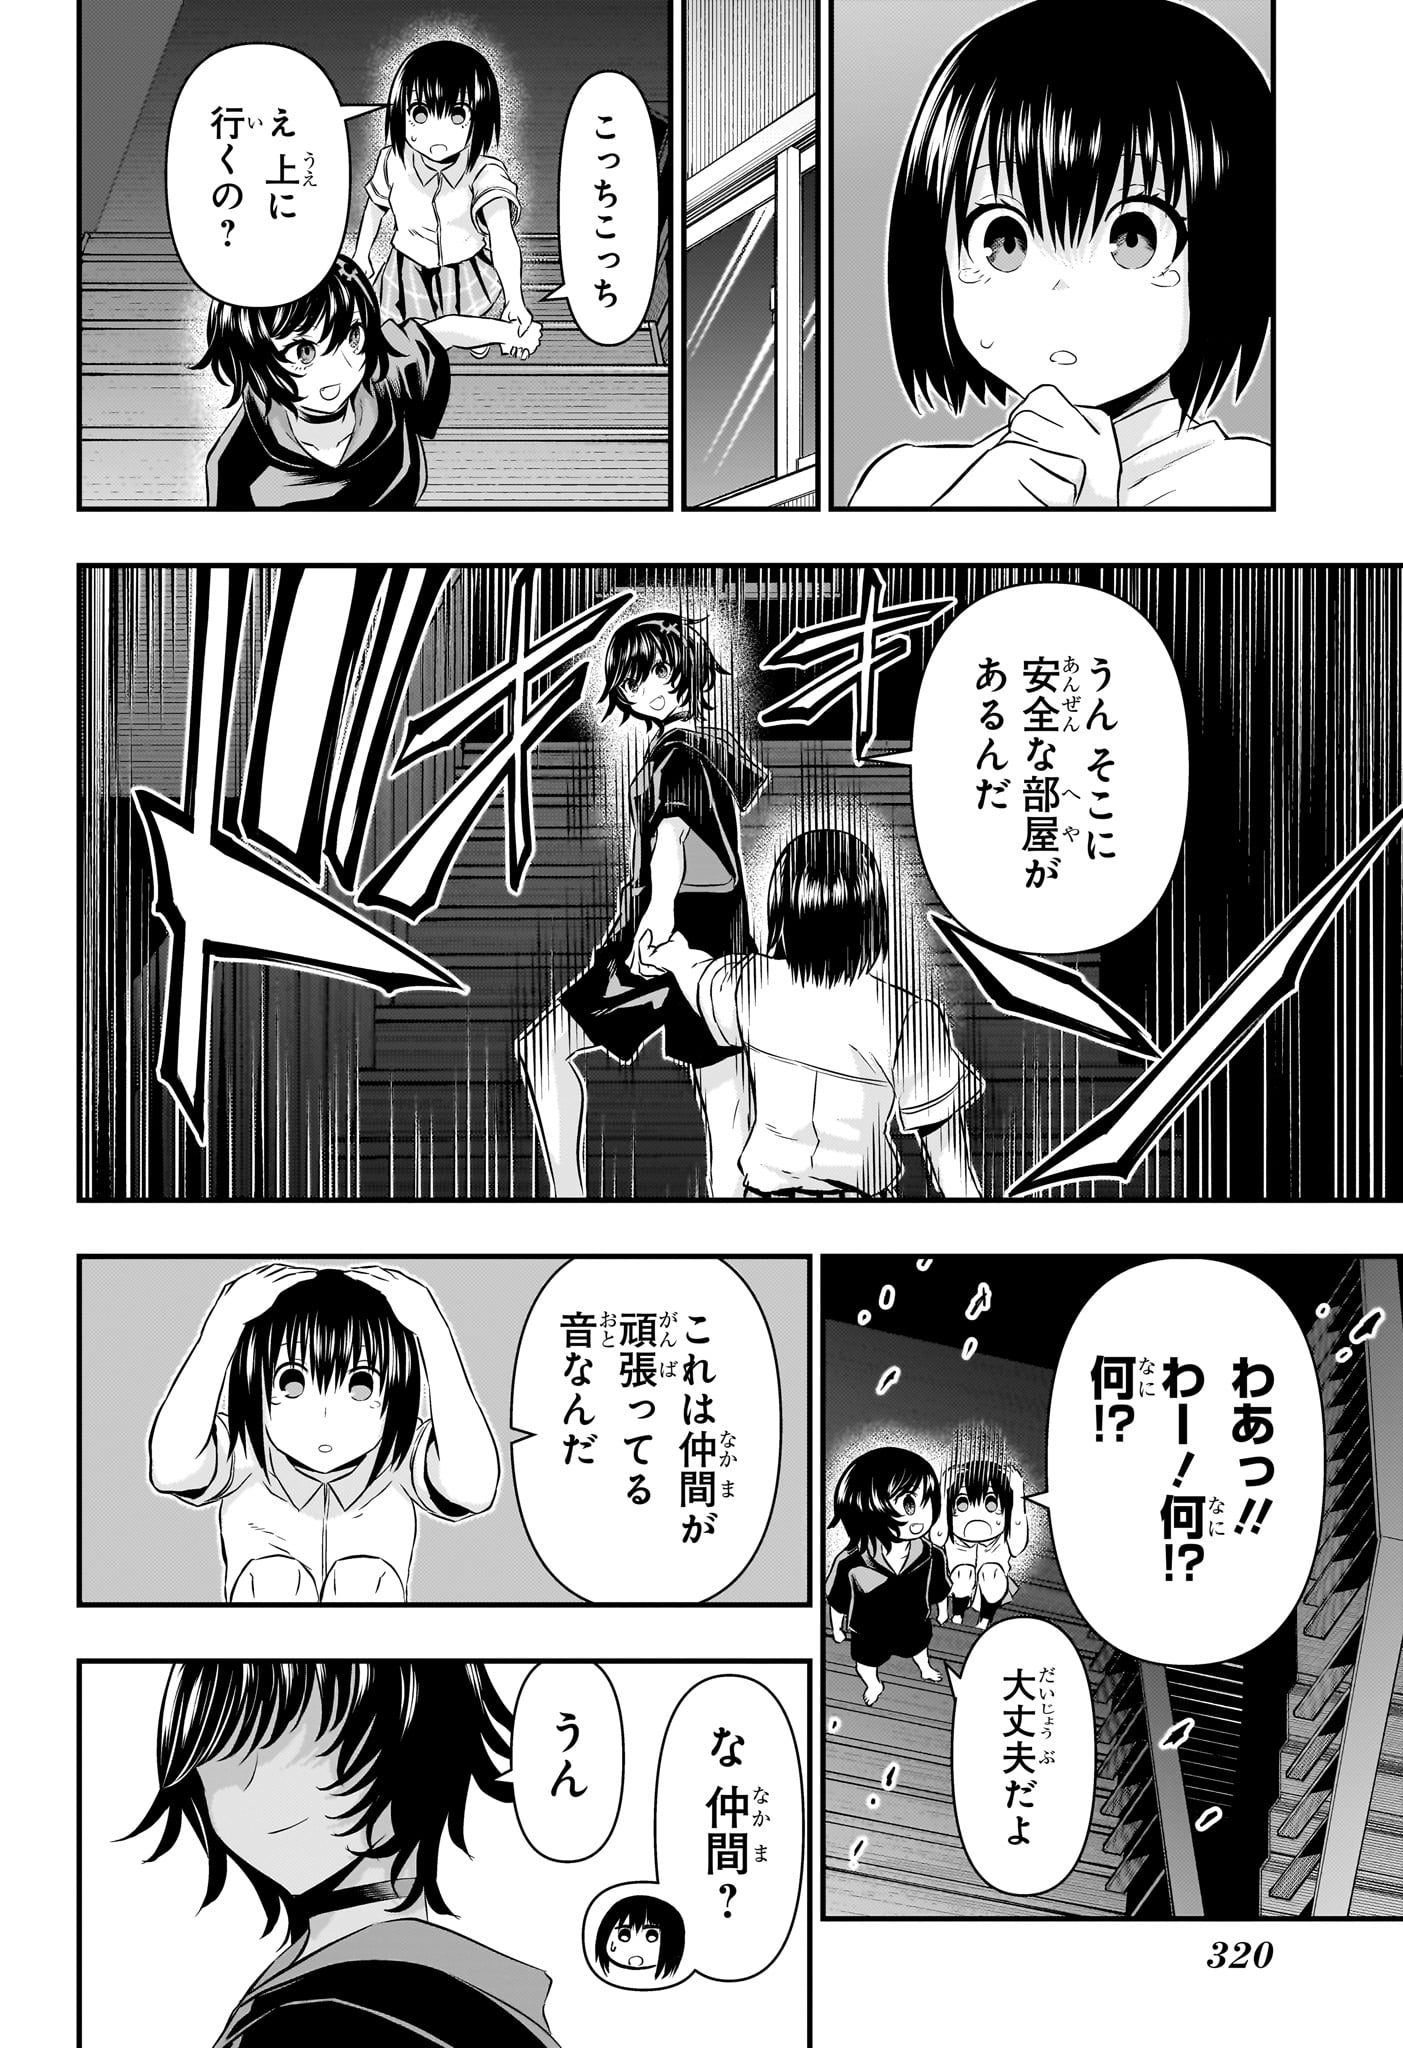 Nue no Onmyouji - Chapter 59 - Page 4